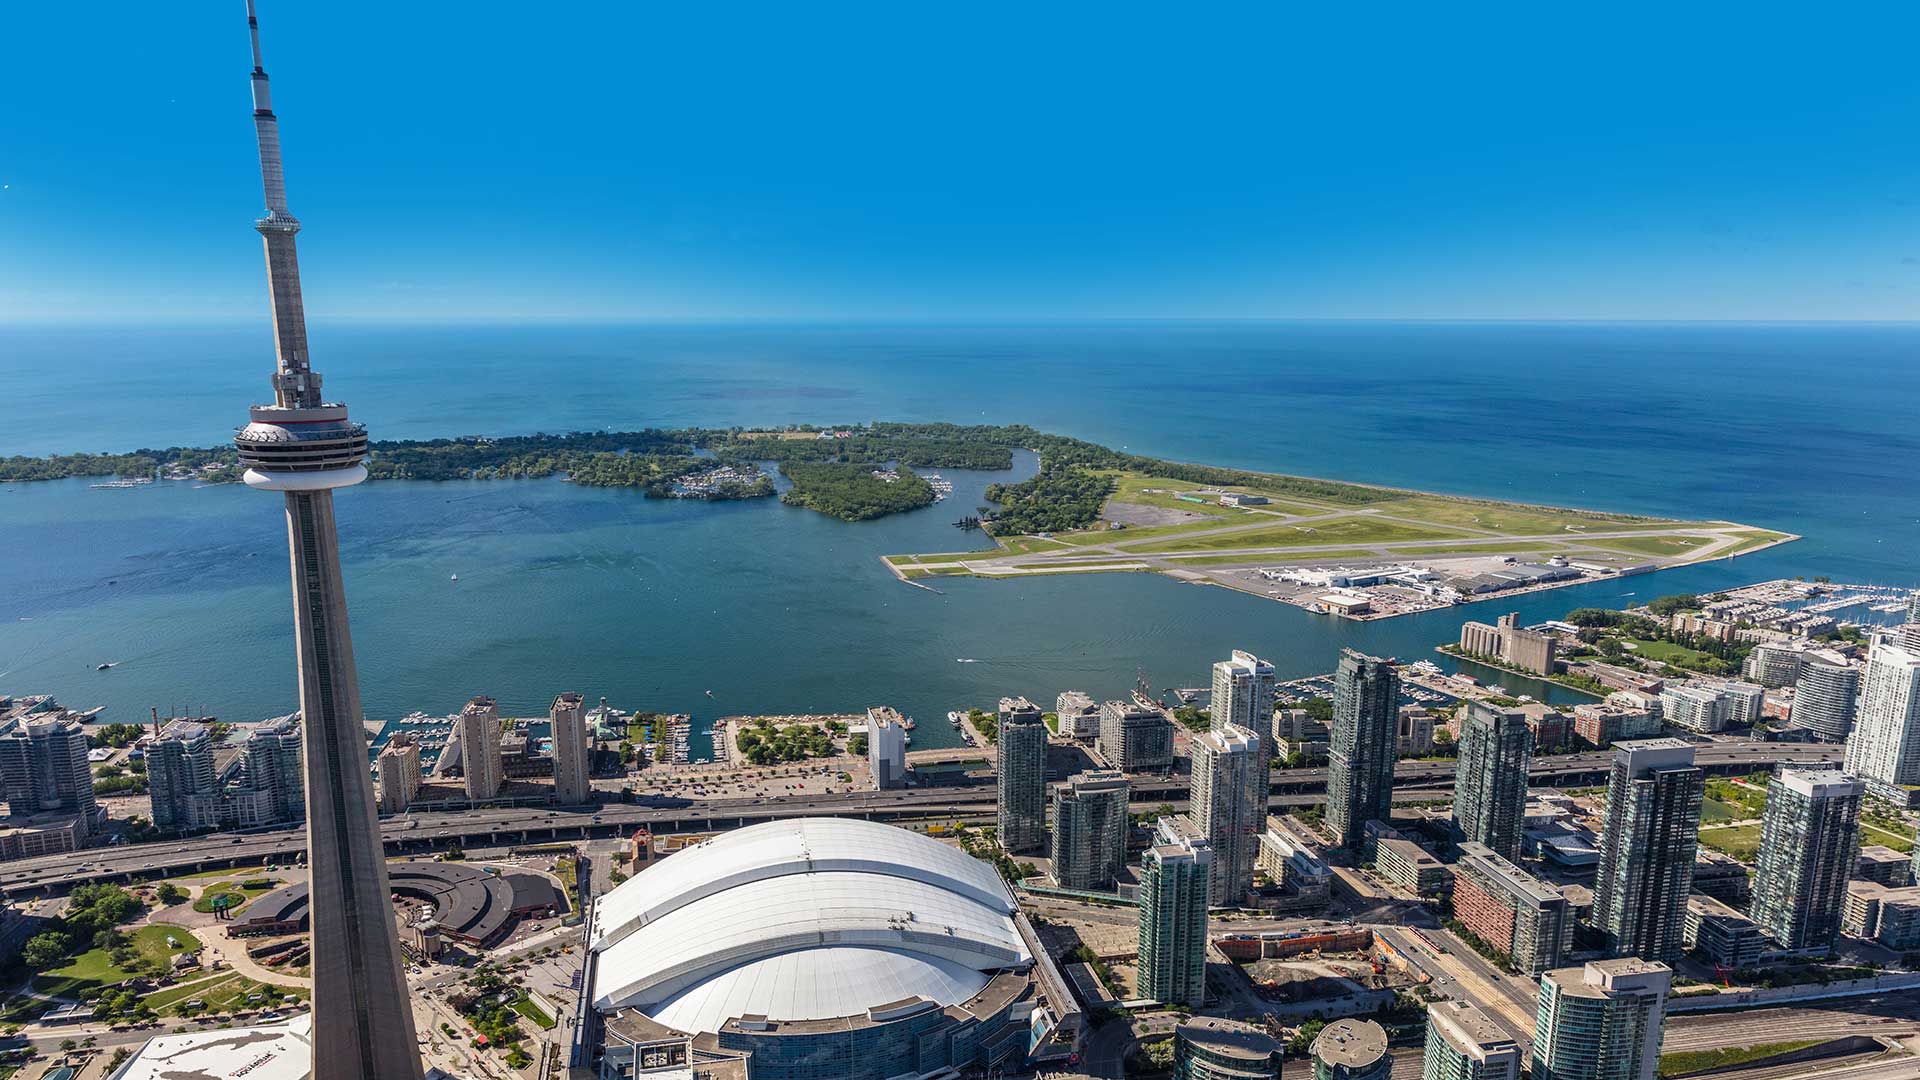 Billy Bishop Toronto City Airport Commemorates International Women’s Day by Honouring Women in Aviation